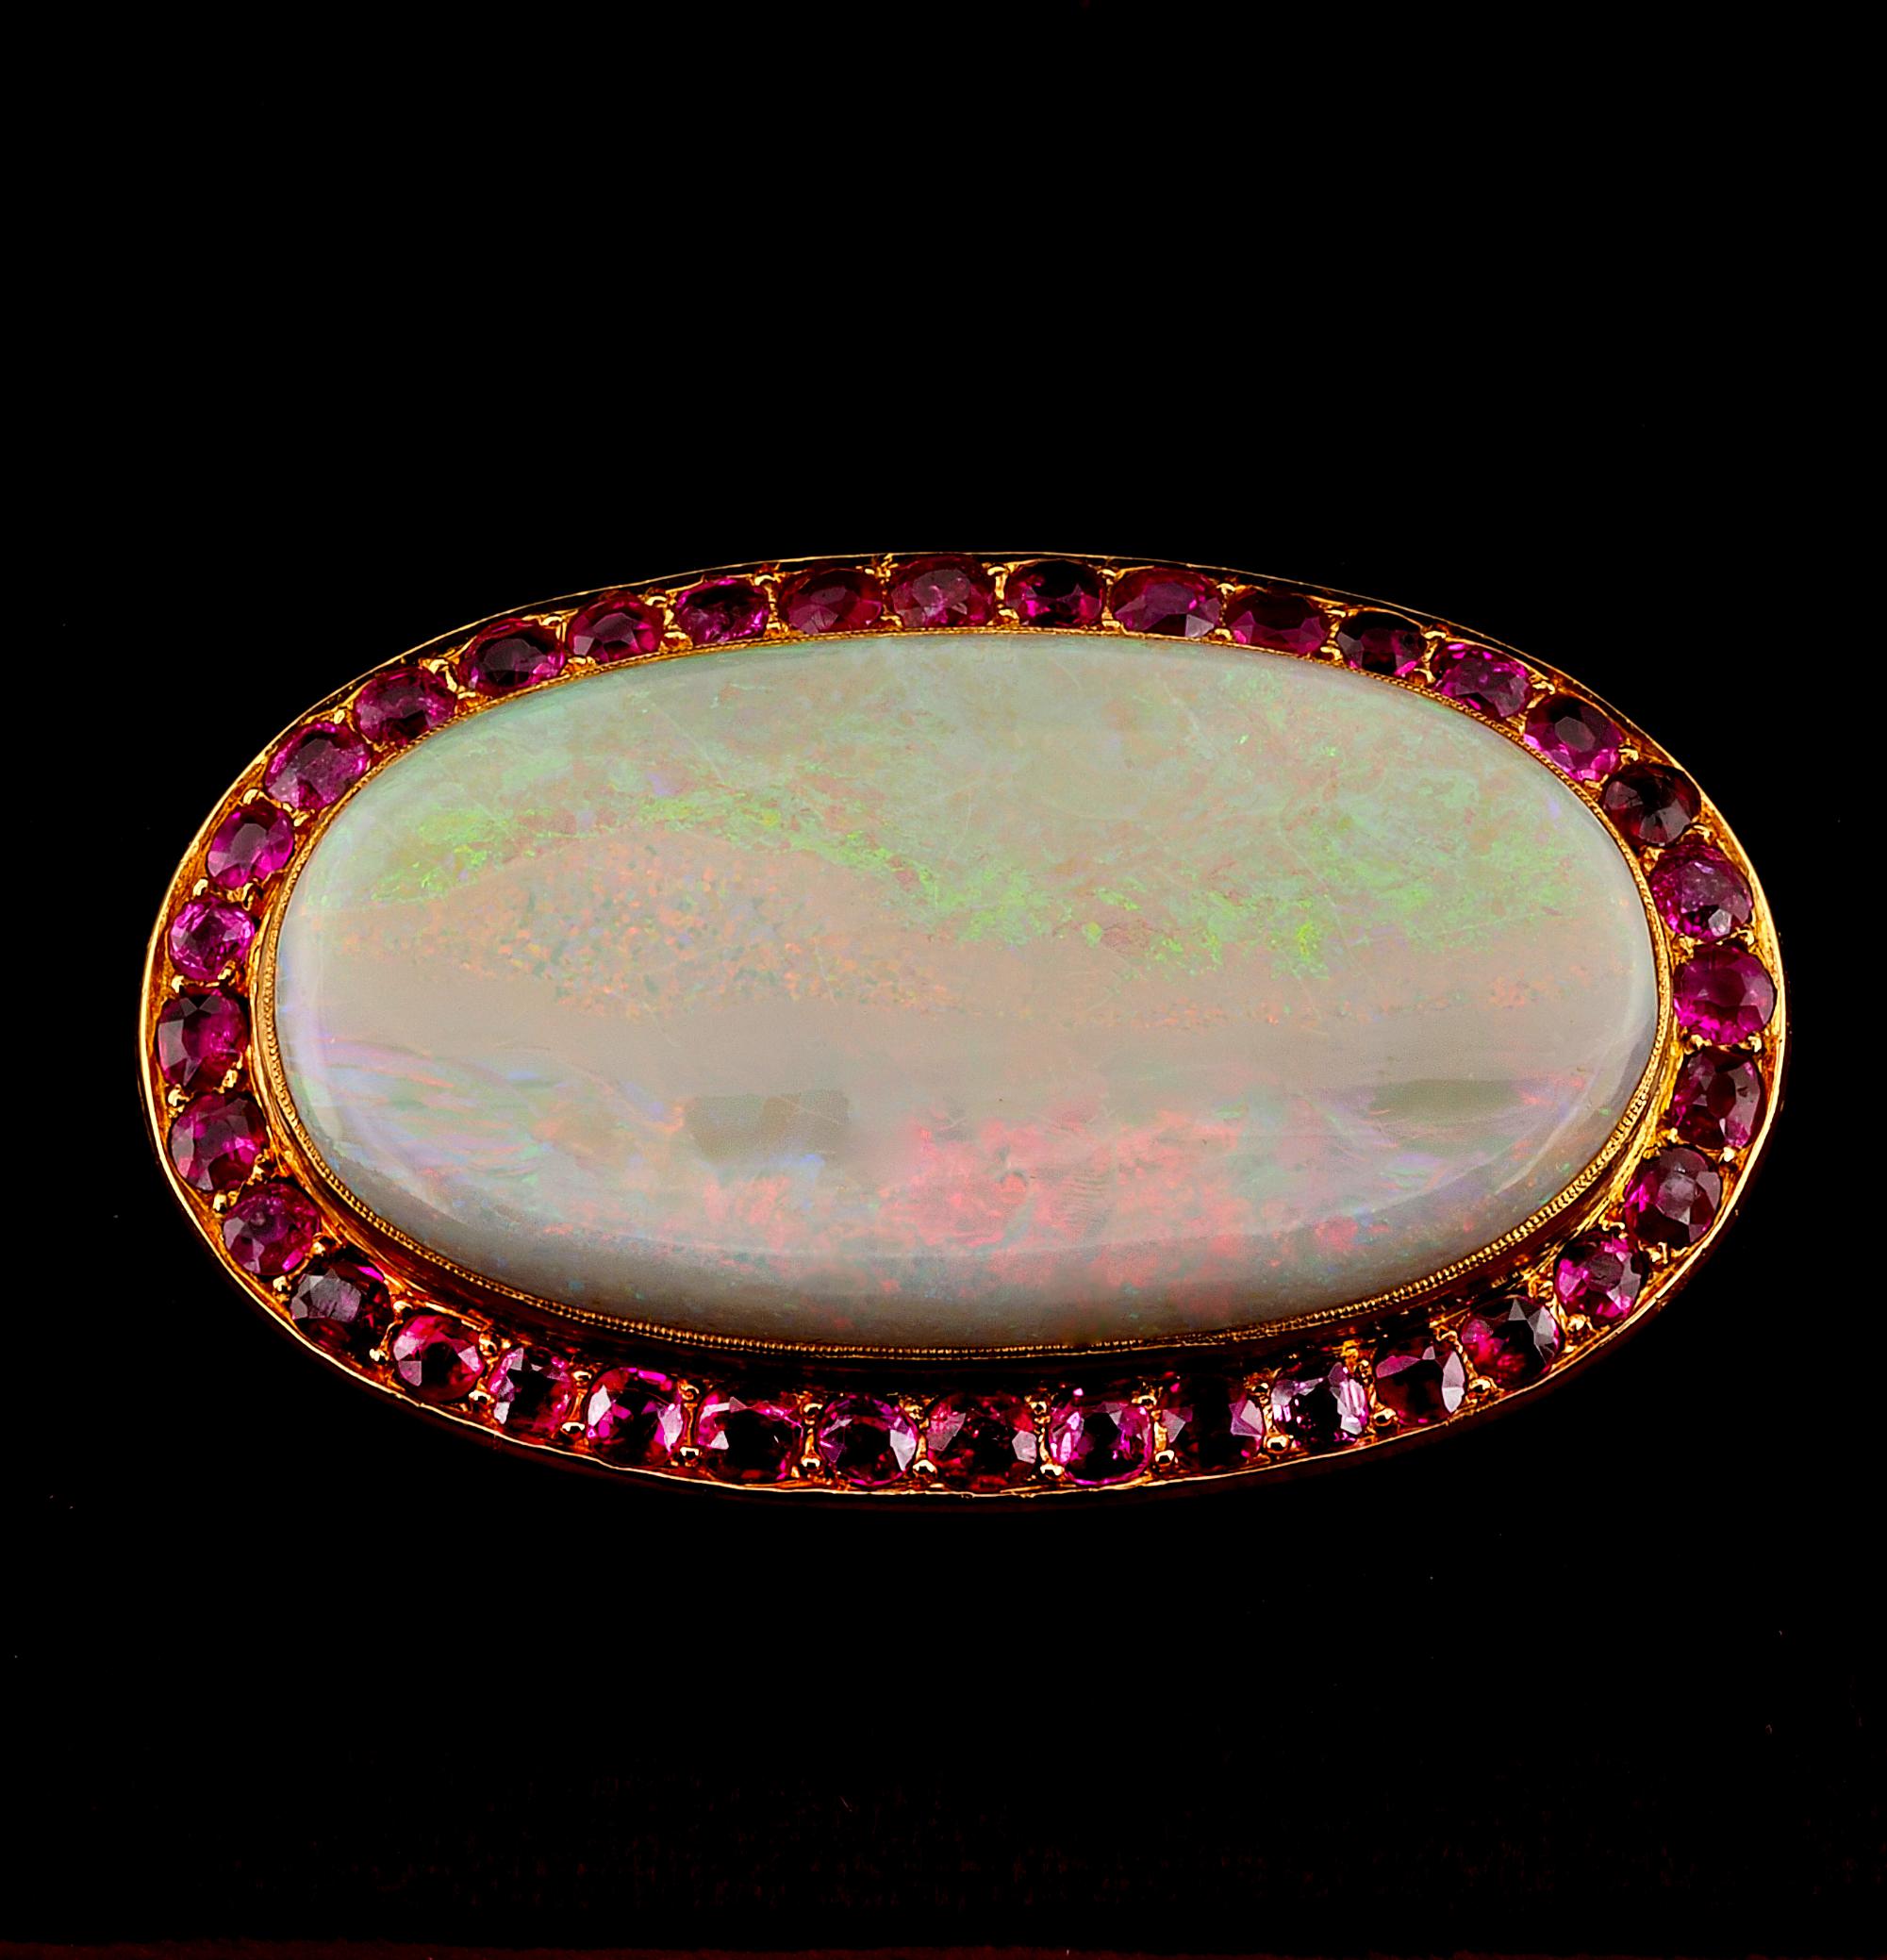 Rare Find
This truly unique large brooch is Victorian period, France 1890 ca – bearing French hallmarks from the period
Impressive 39.00 Ct Natural Australian Opal, rare size to come across set in this stunning period brooch in a simple yet